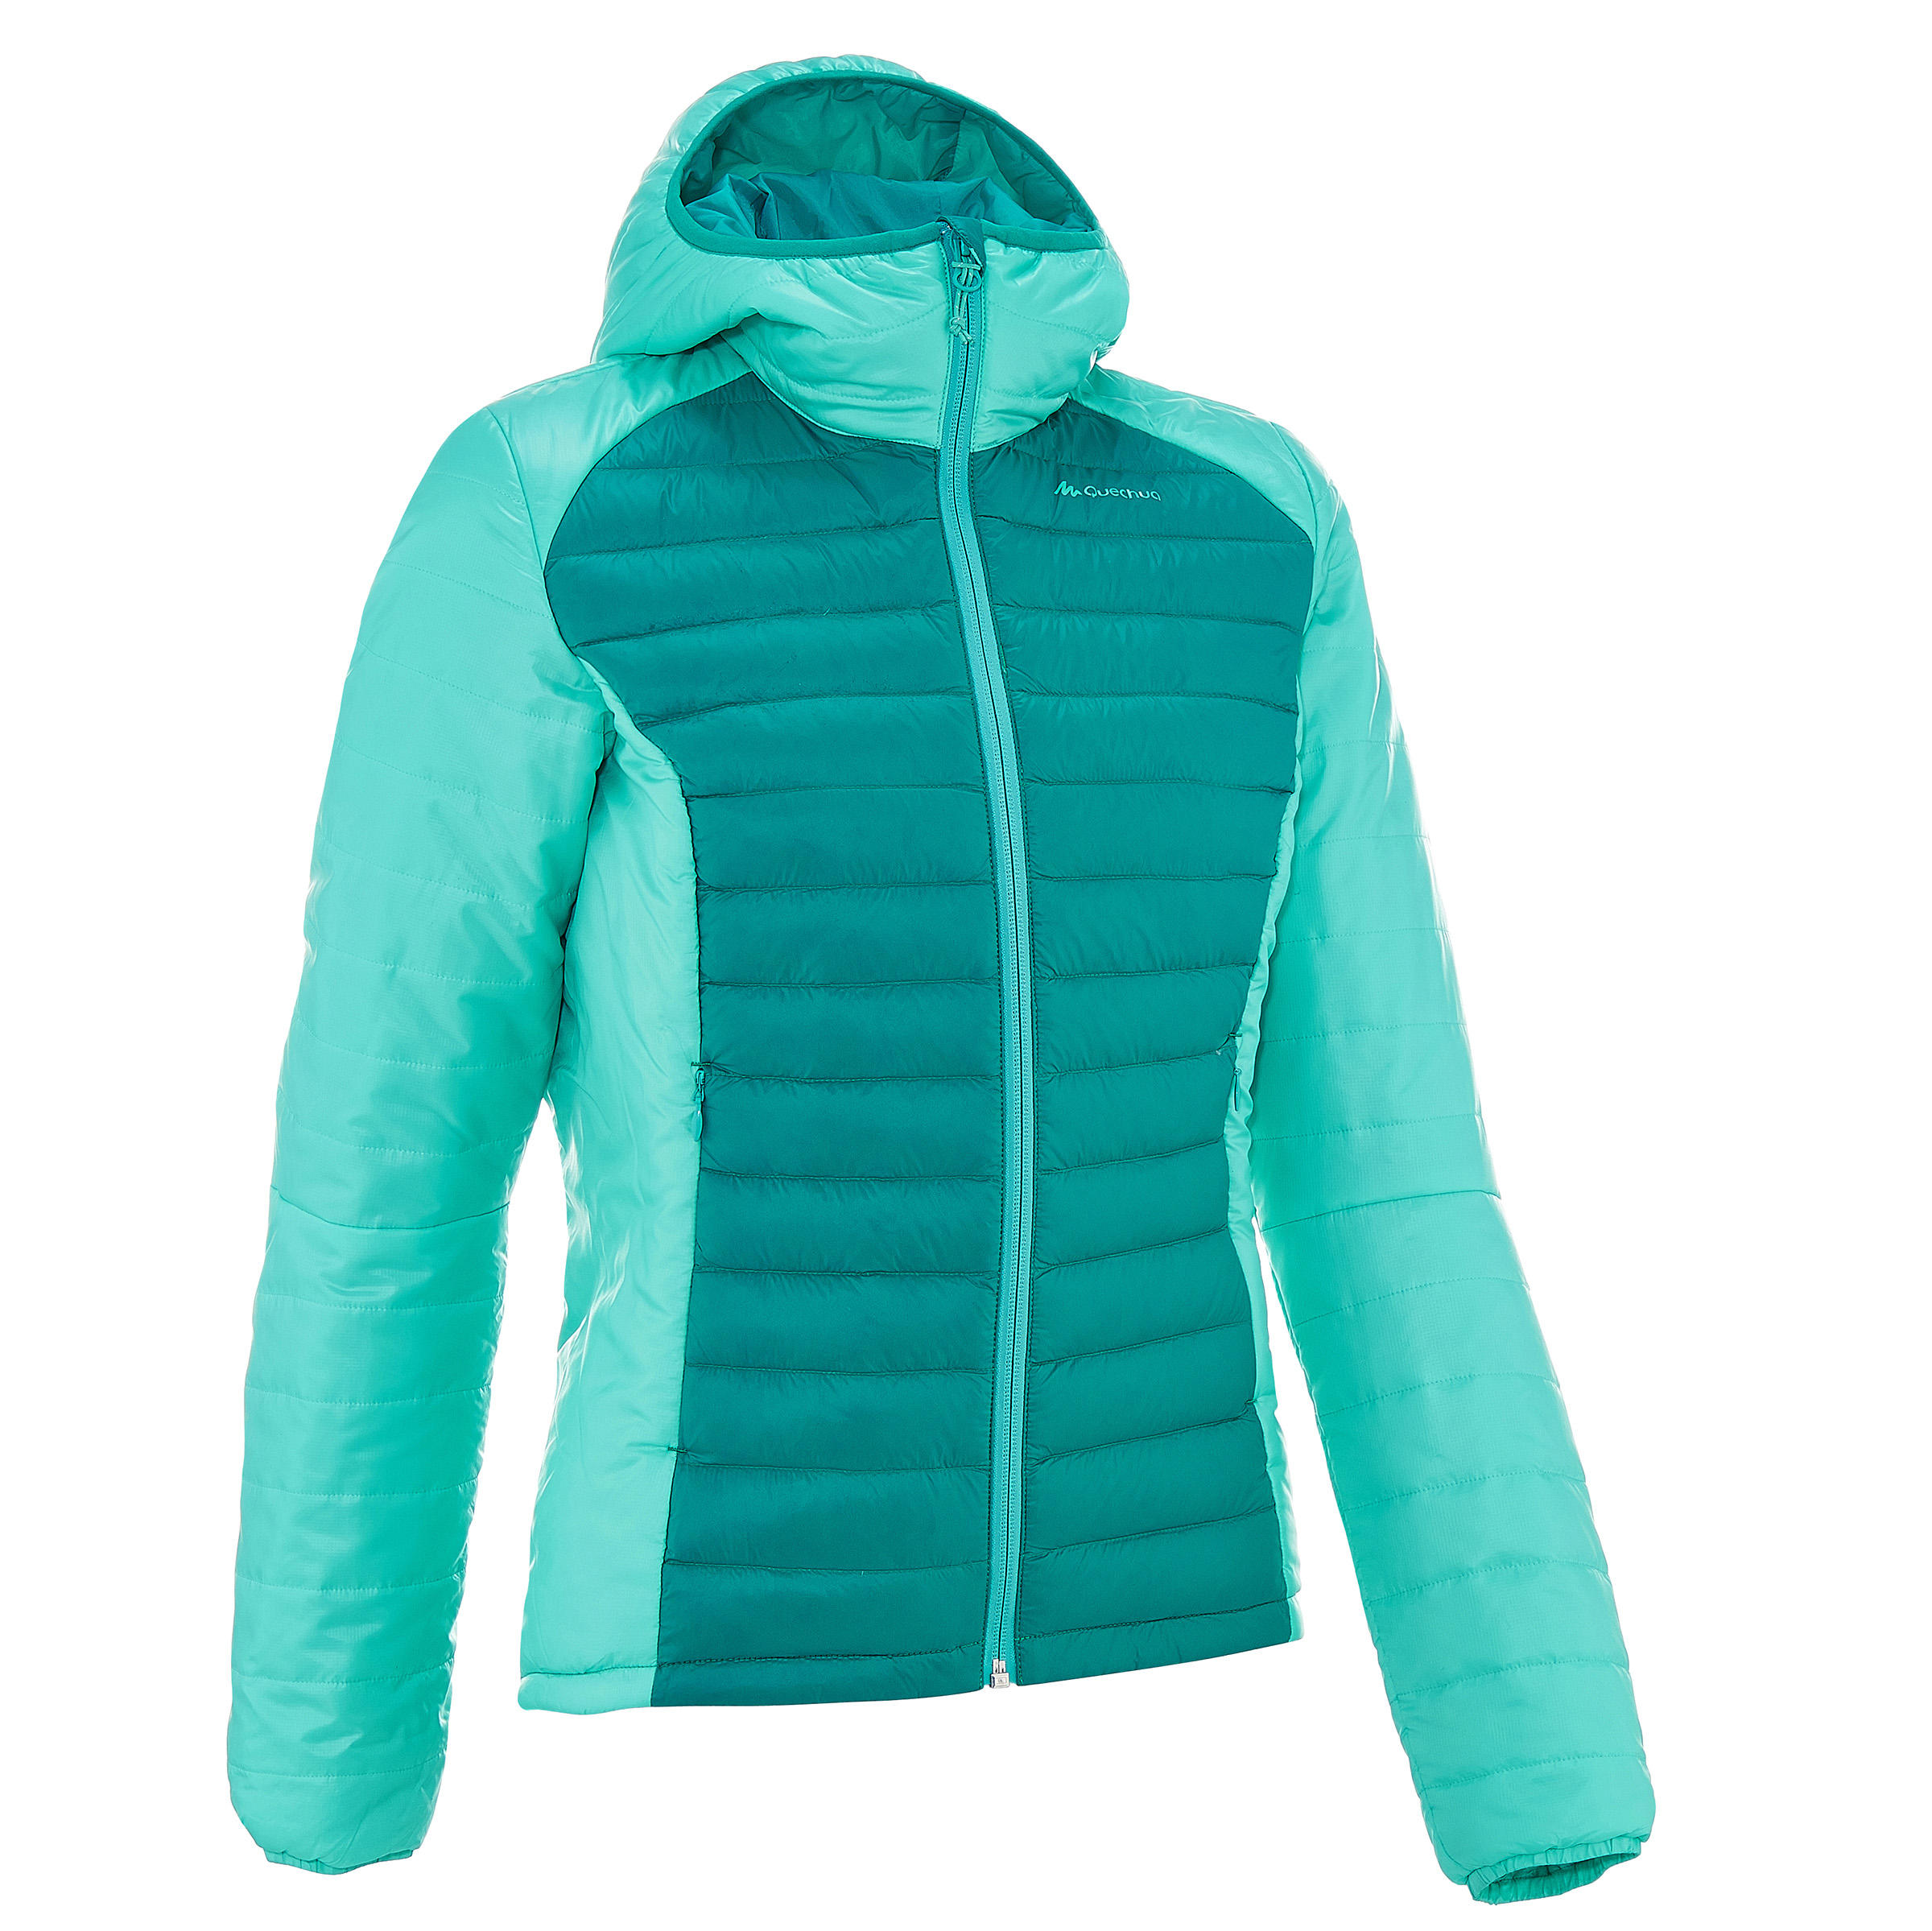 FORCLAZ X-Light Ladies' Quilted Hiking Jacket - green